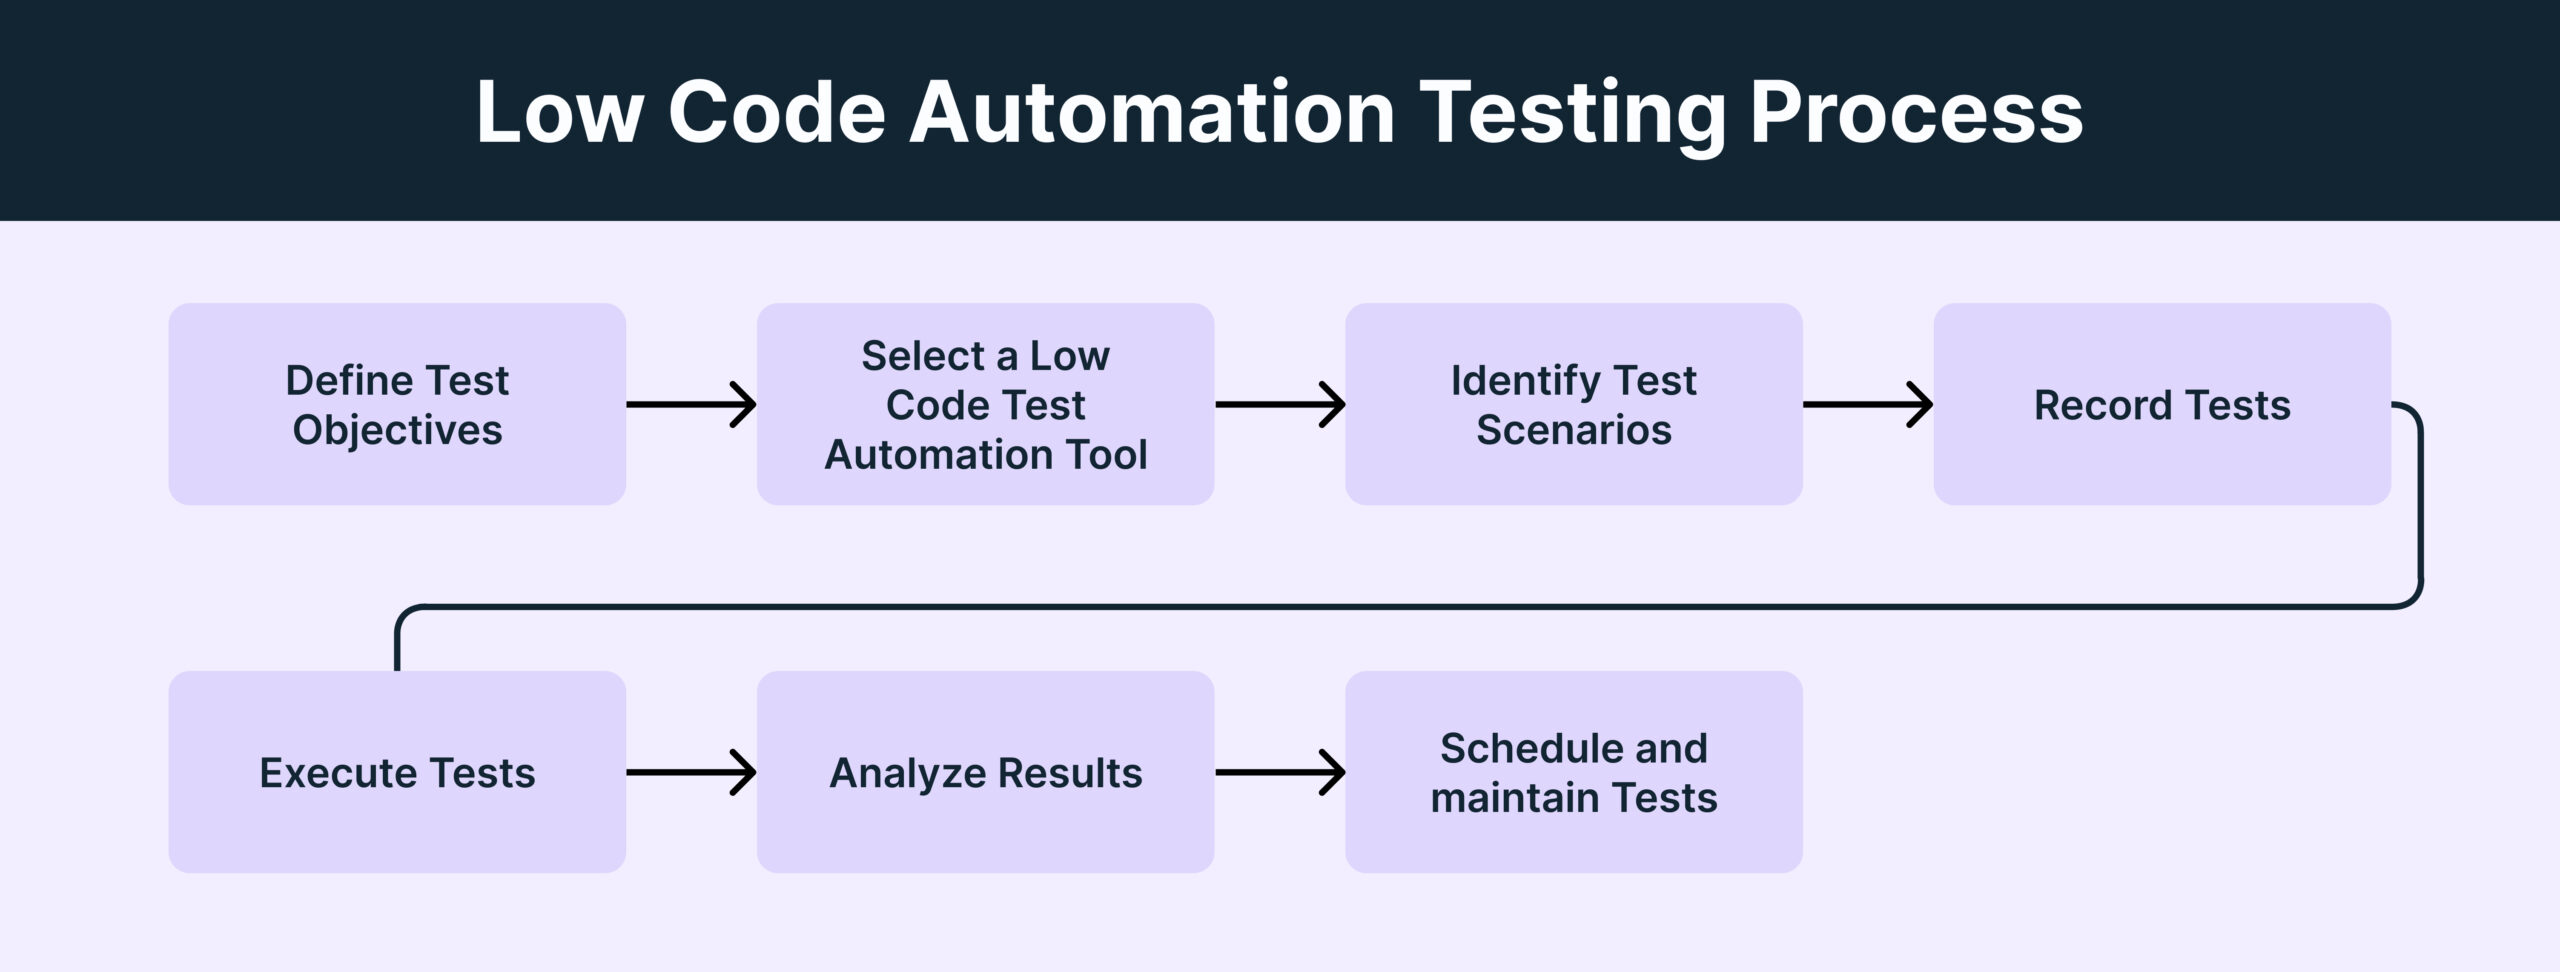 Low Code Automation Testing Process